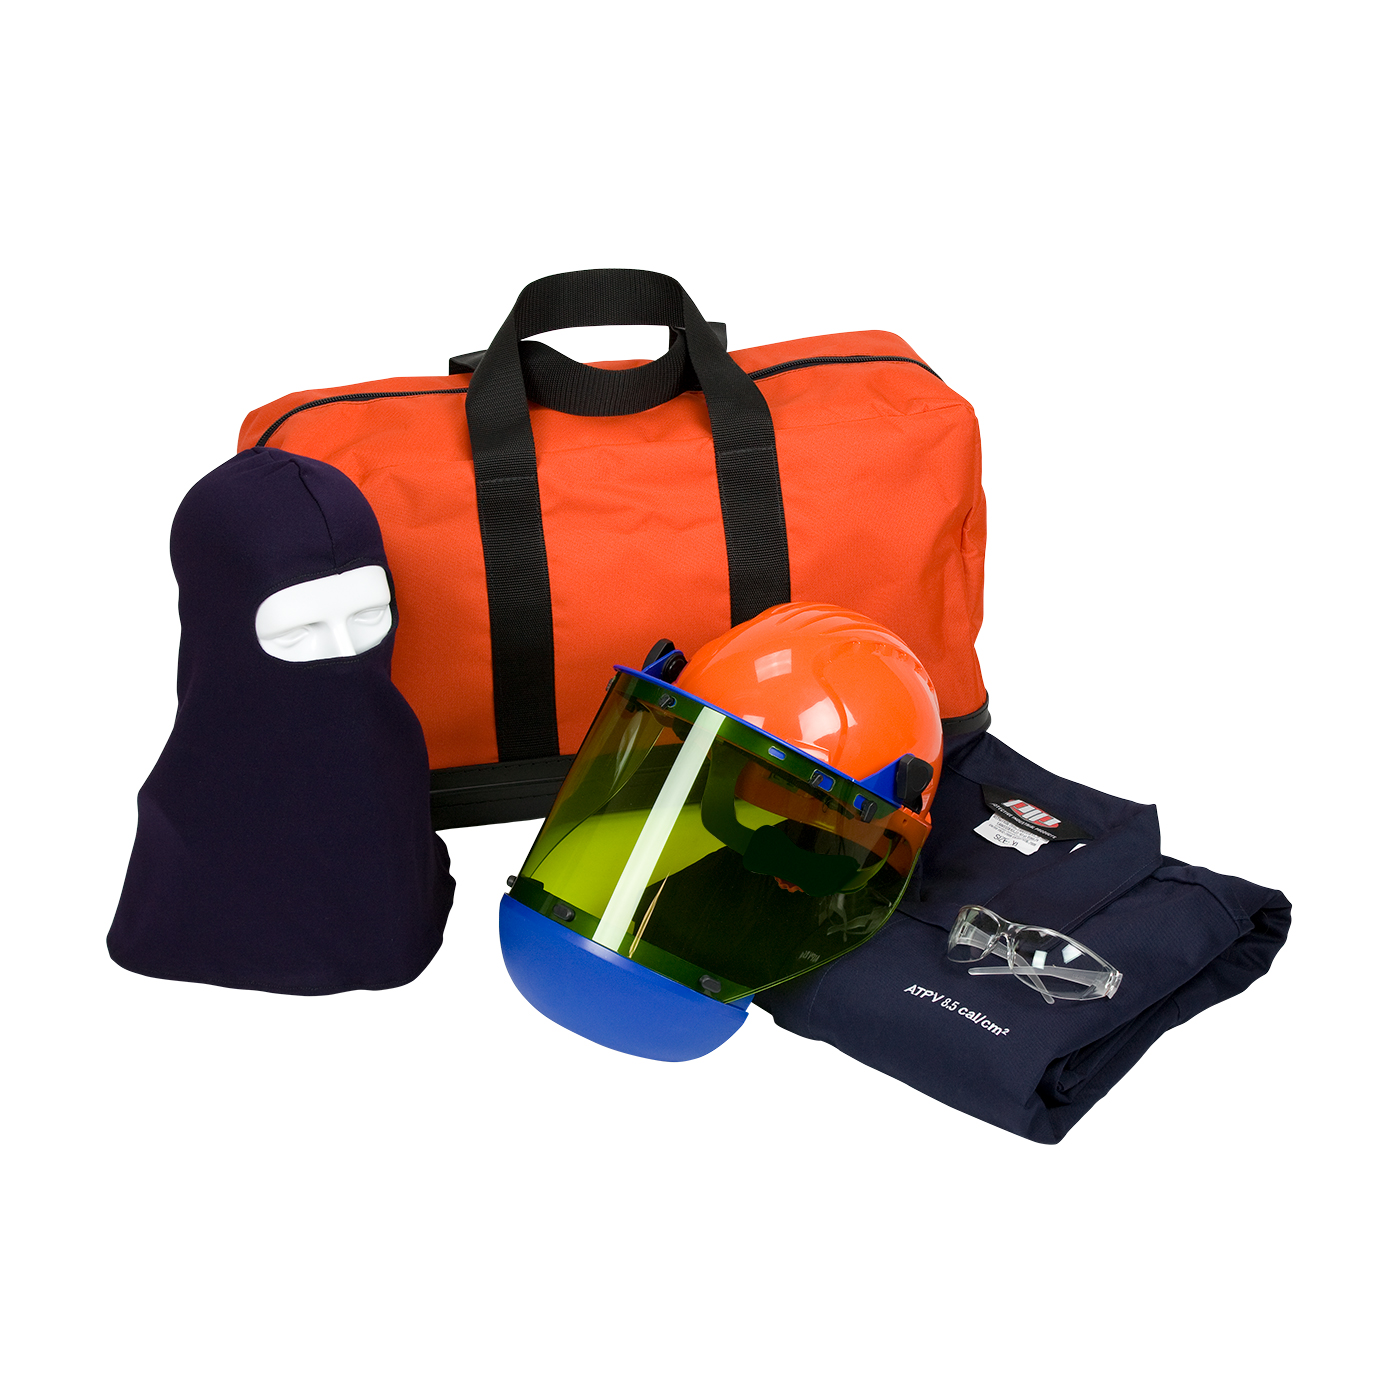 PIP® Navy 12 Cal/cm2 Arc & Flame Resistant Dual Certified Flash Safety Kit - PPE 2